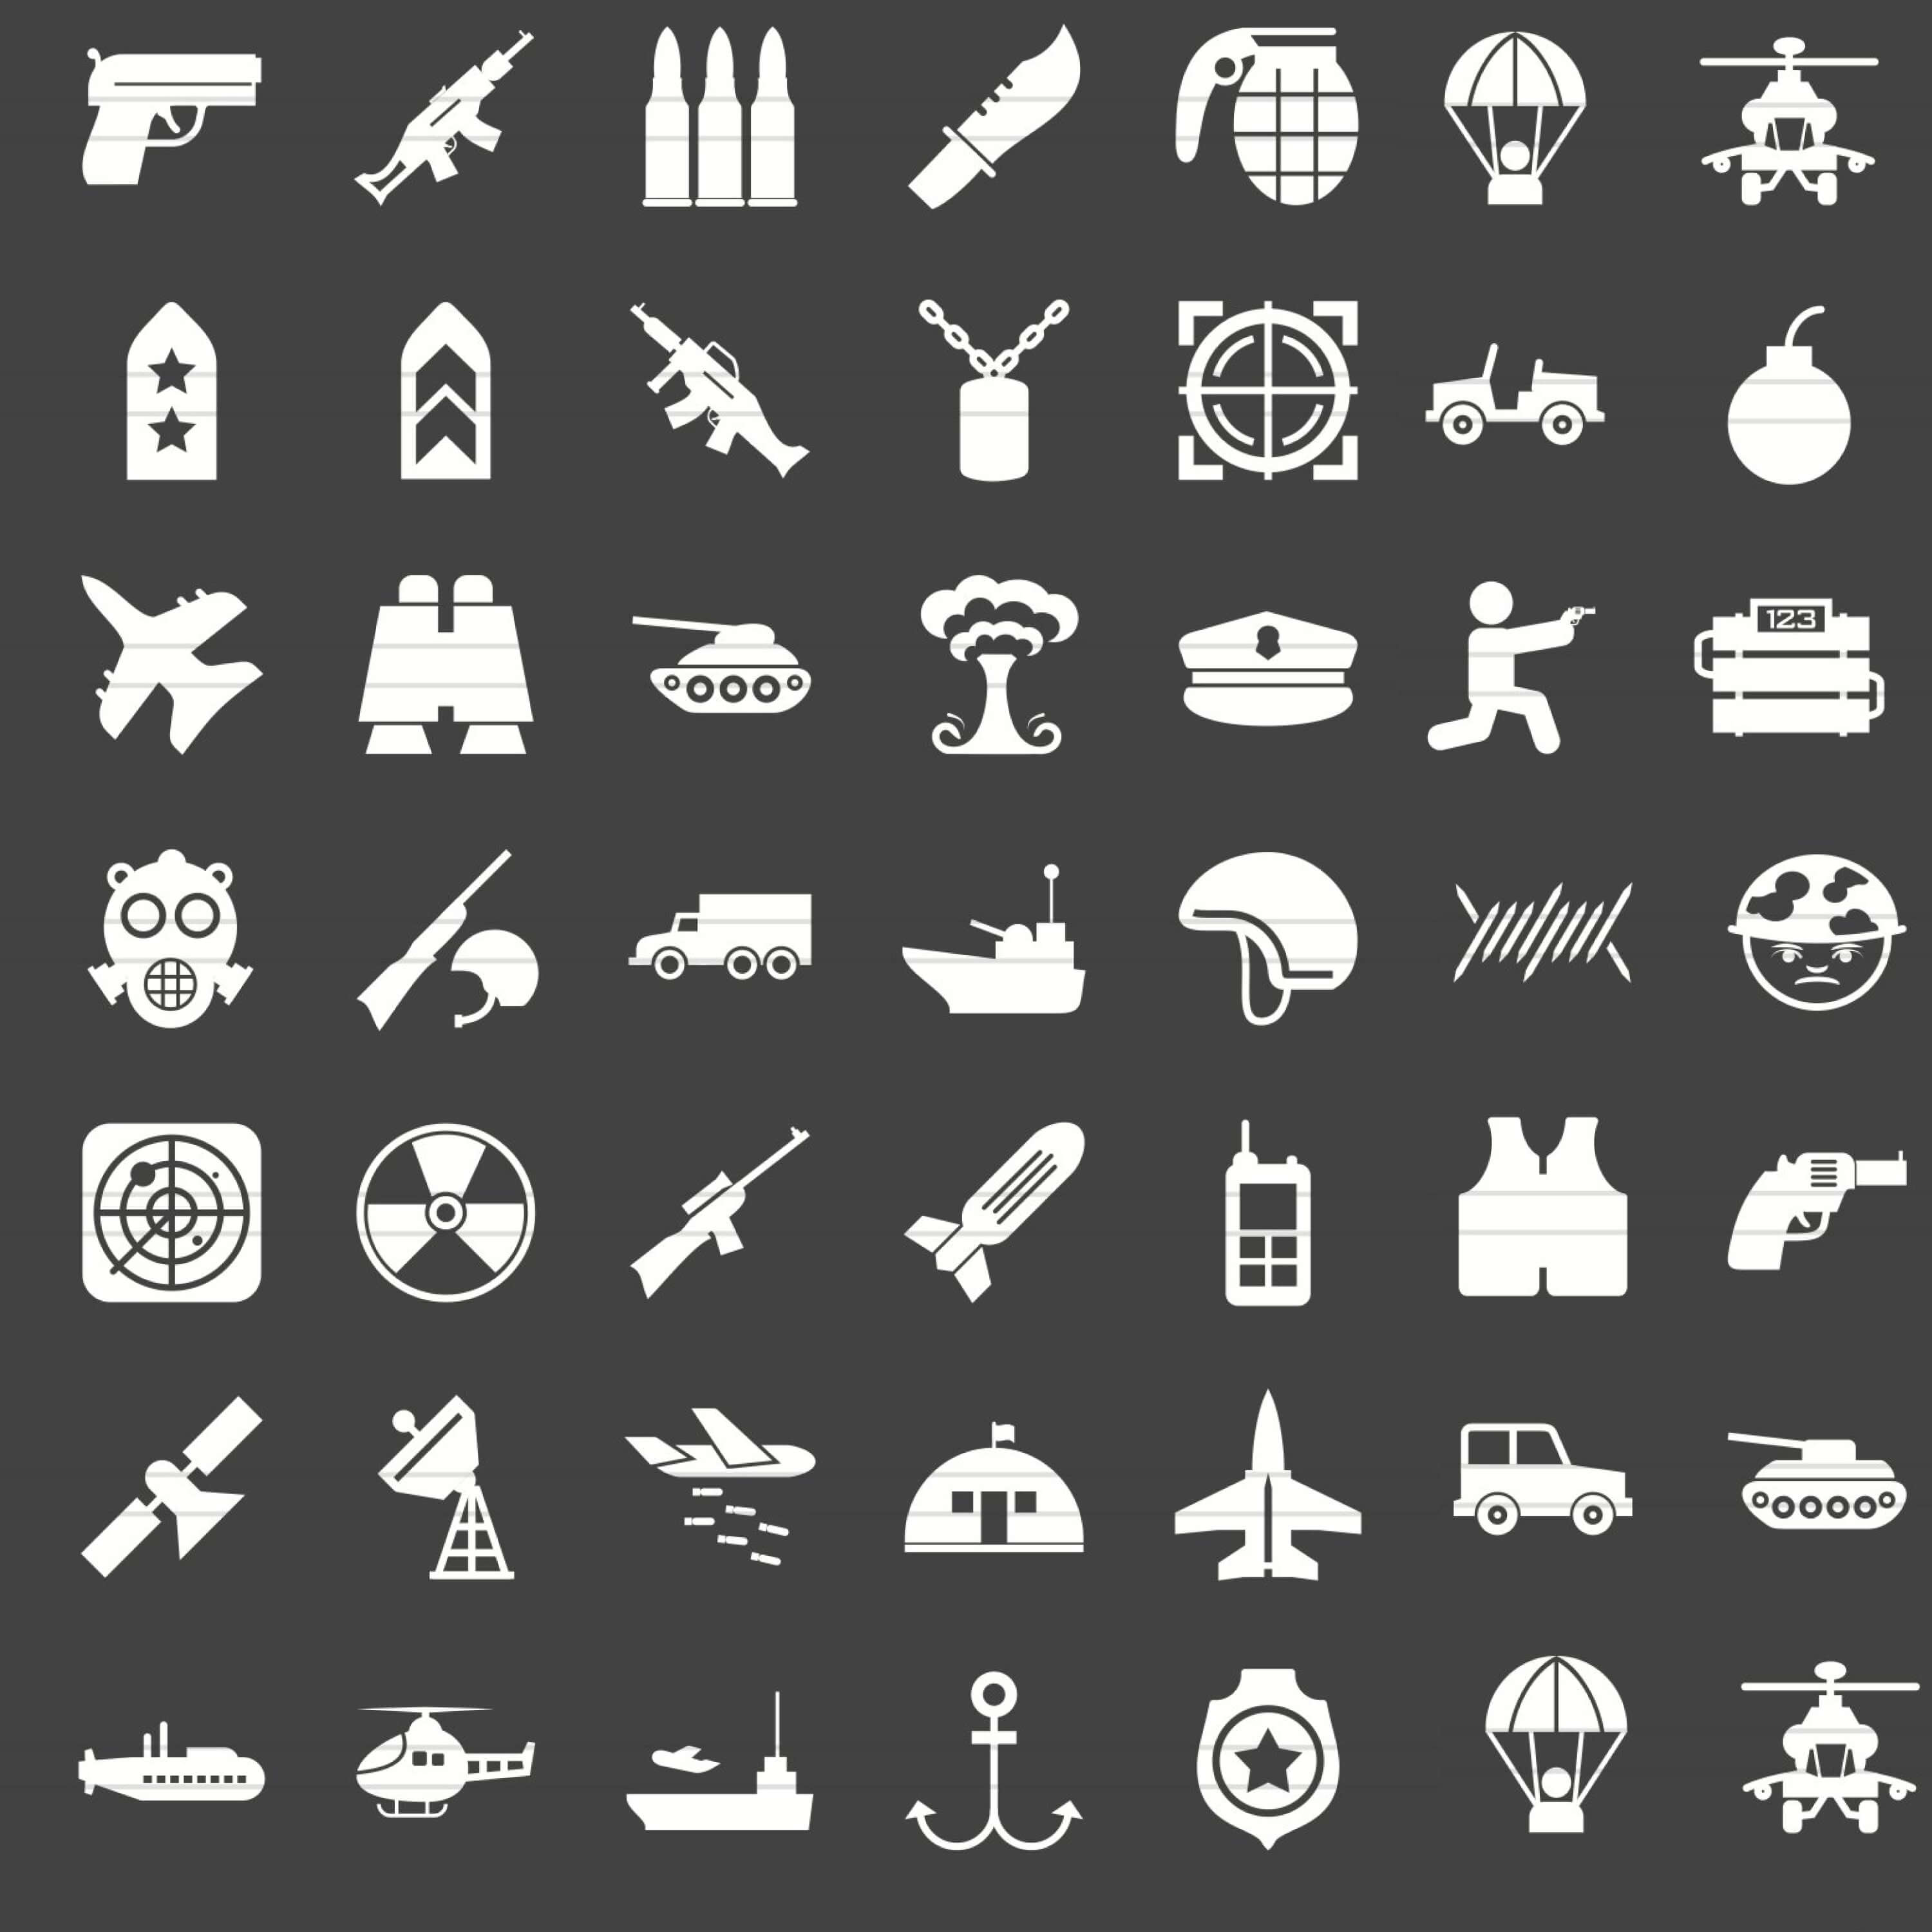 White images of military equipment on a black background.